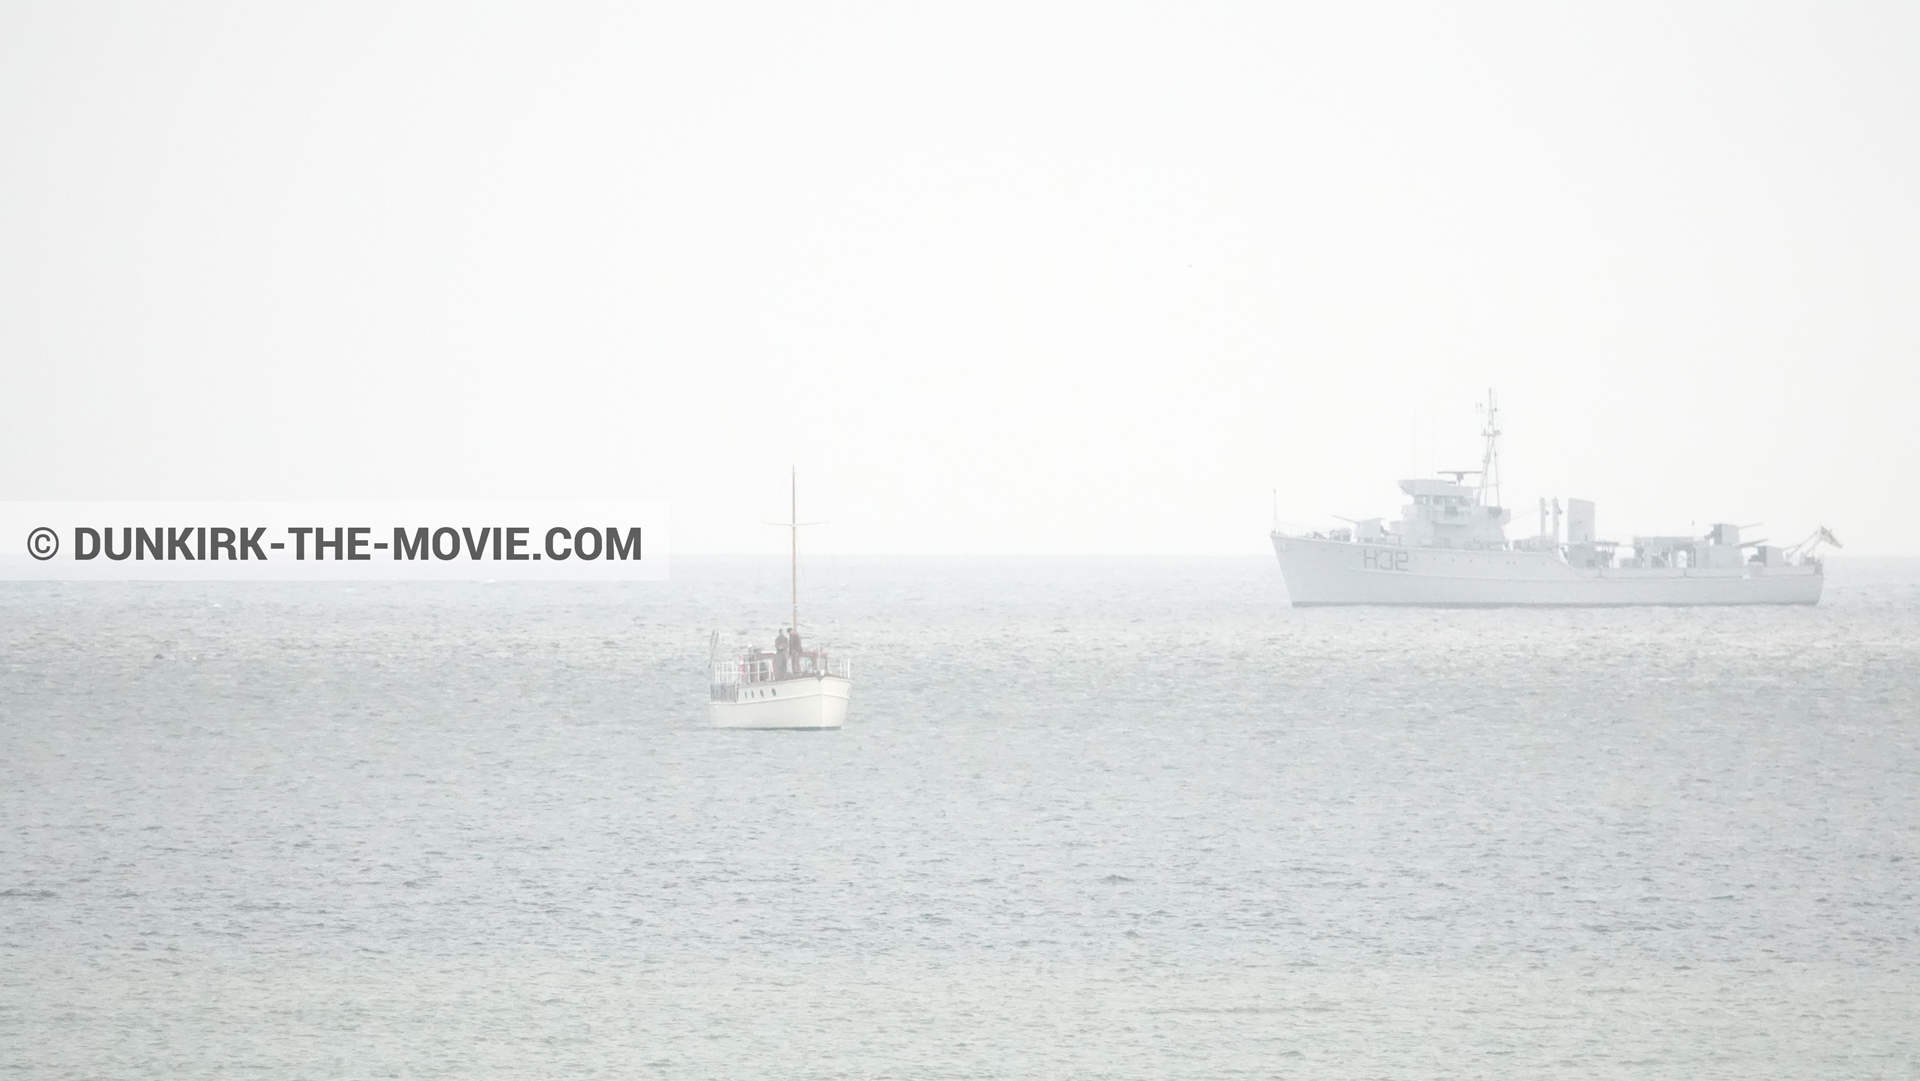 Picture with boat, H32 - Hr.Ms. Sittard,  from behind the scene of the Dunkirk movie by Nolan